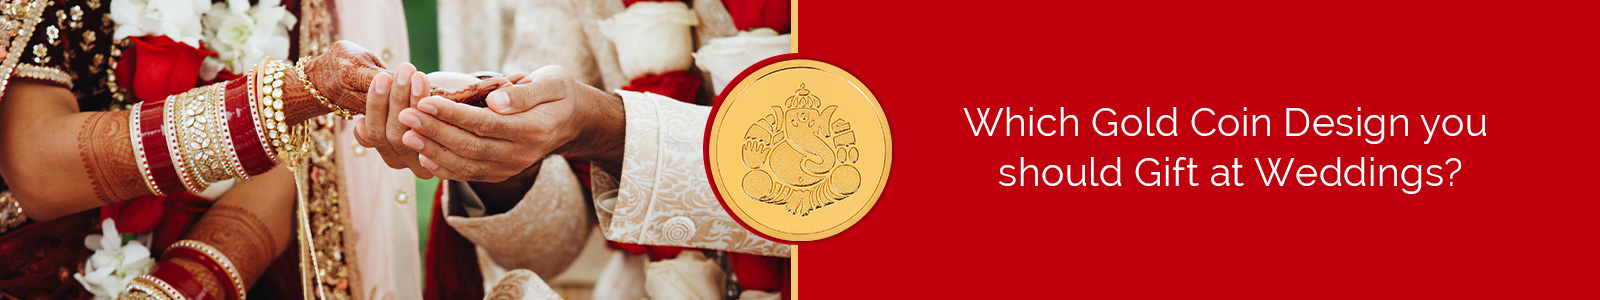 Which gold coin design you should gift at weddings?